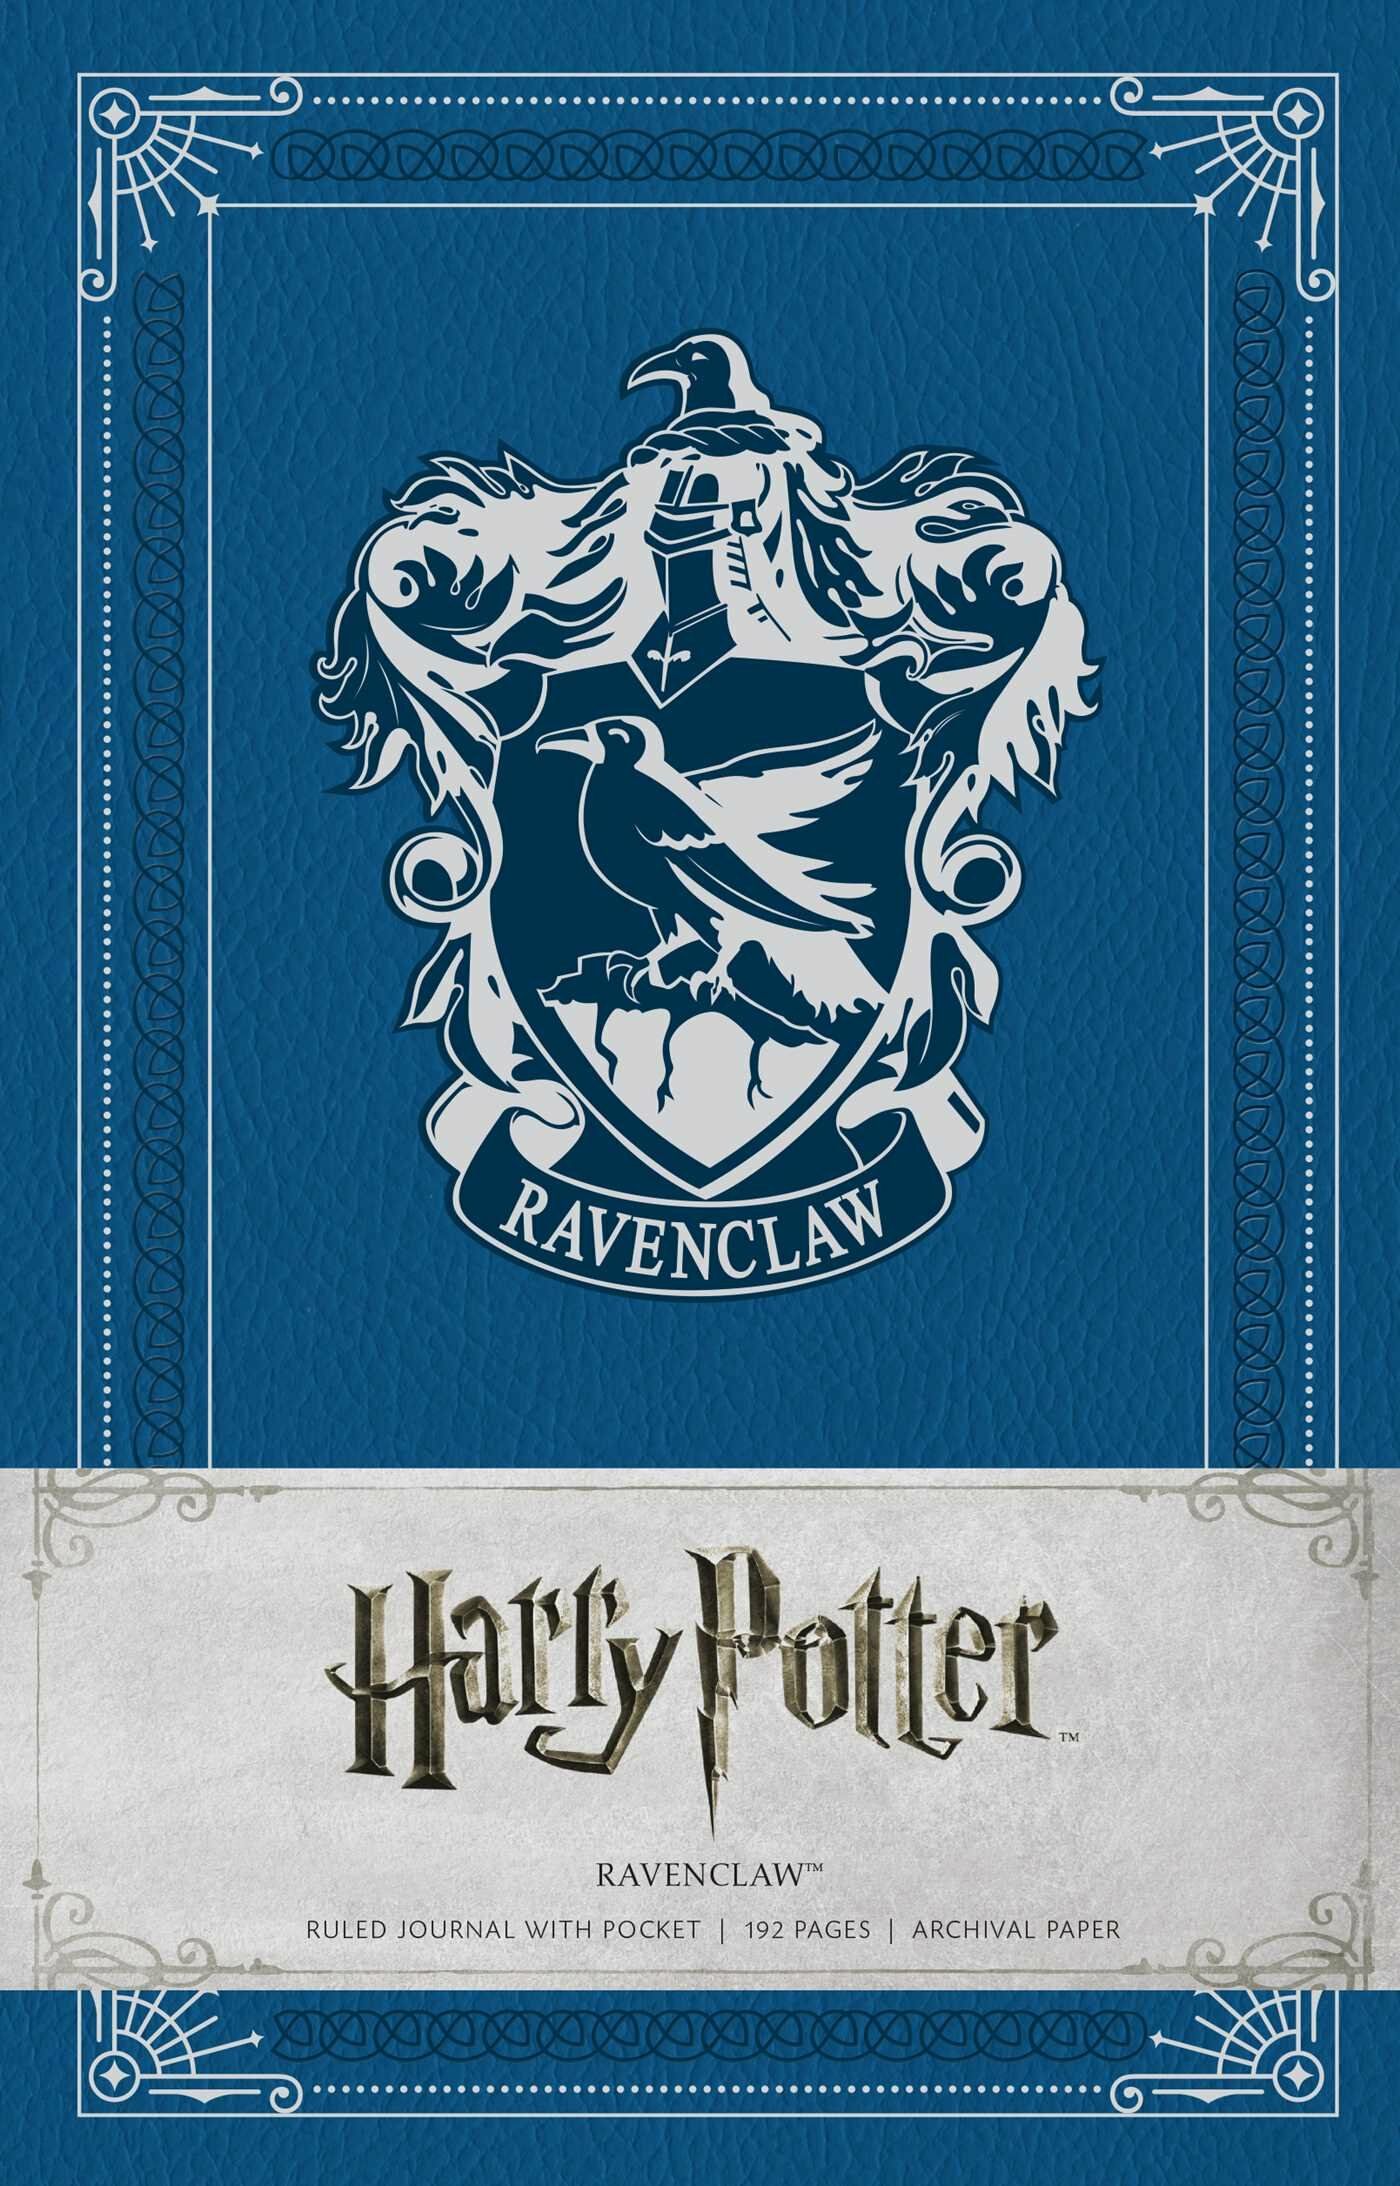 HARRY POTTER: RAVENCLAW HARDCOVER RULED JOURNAL (Book)